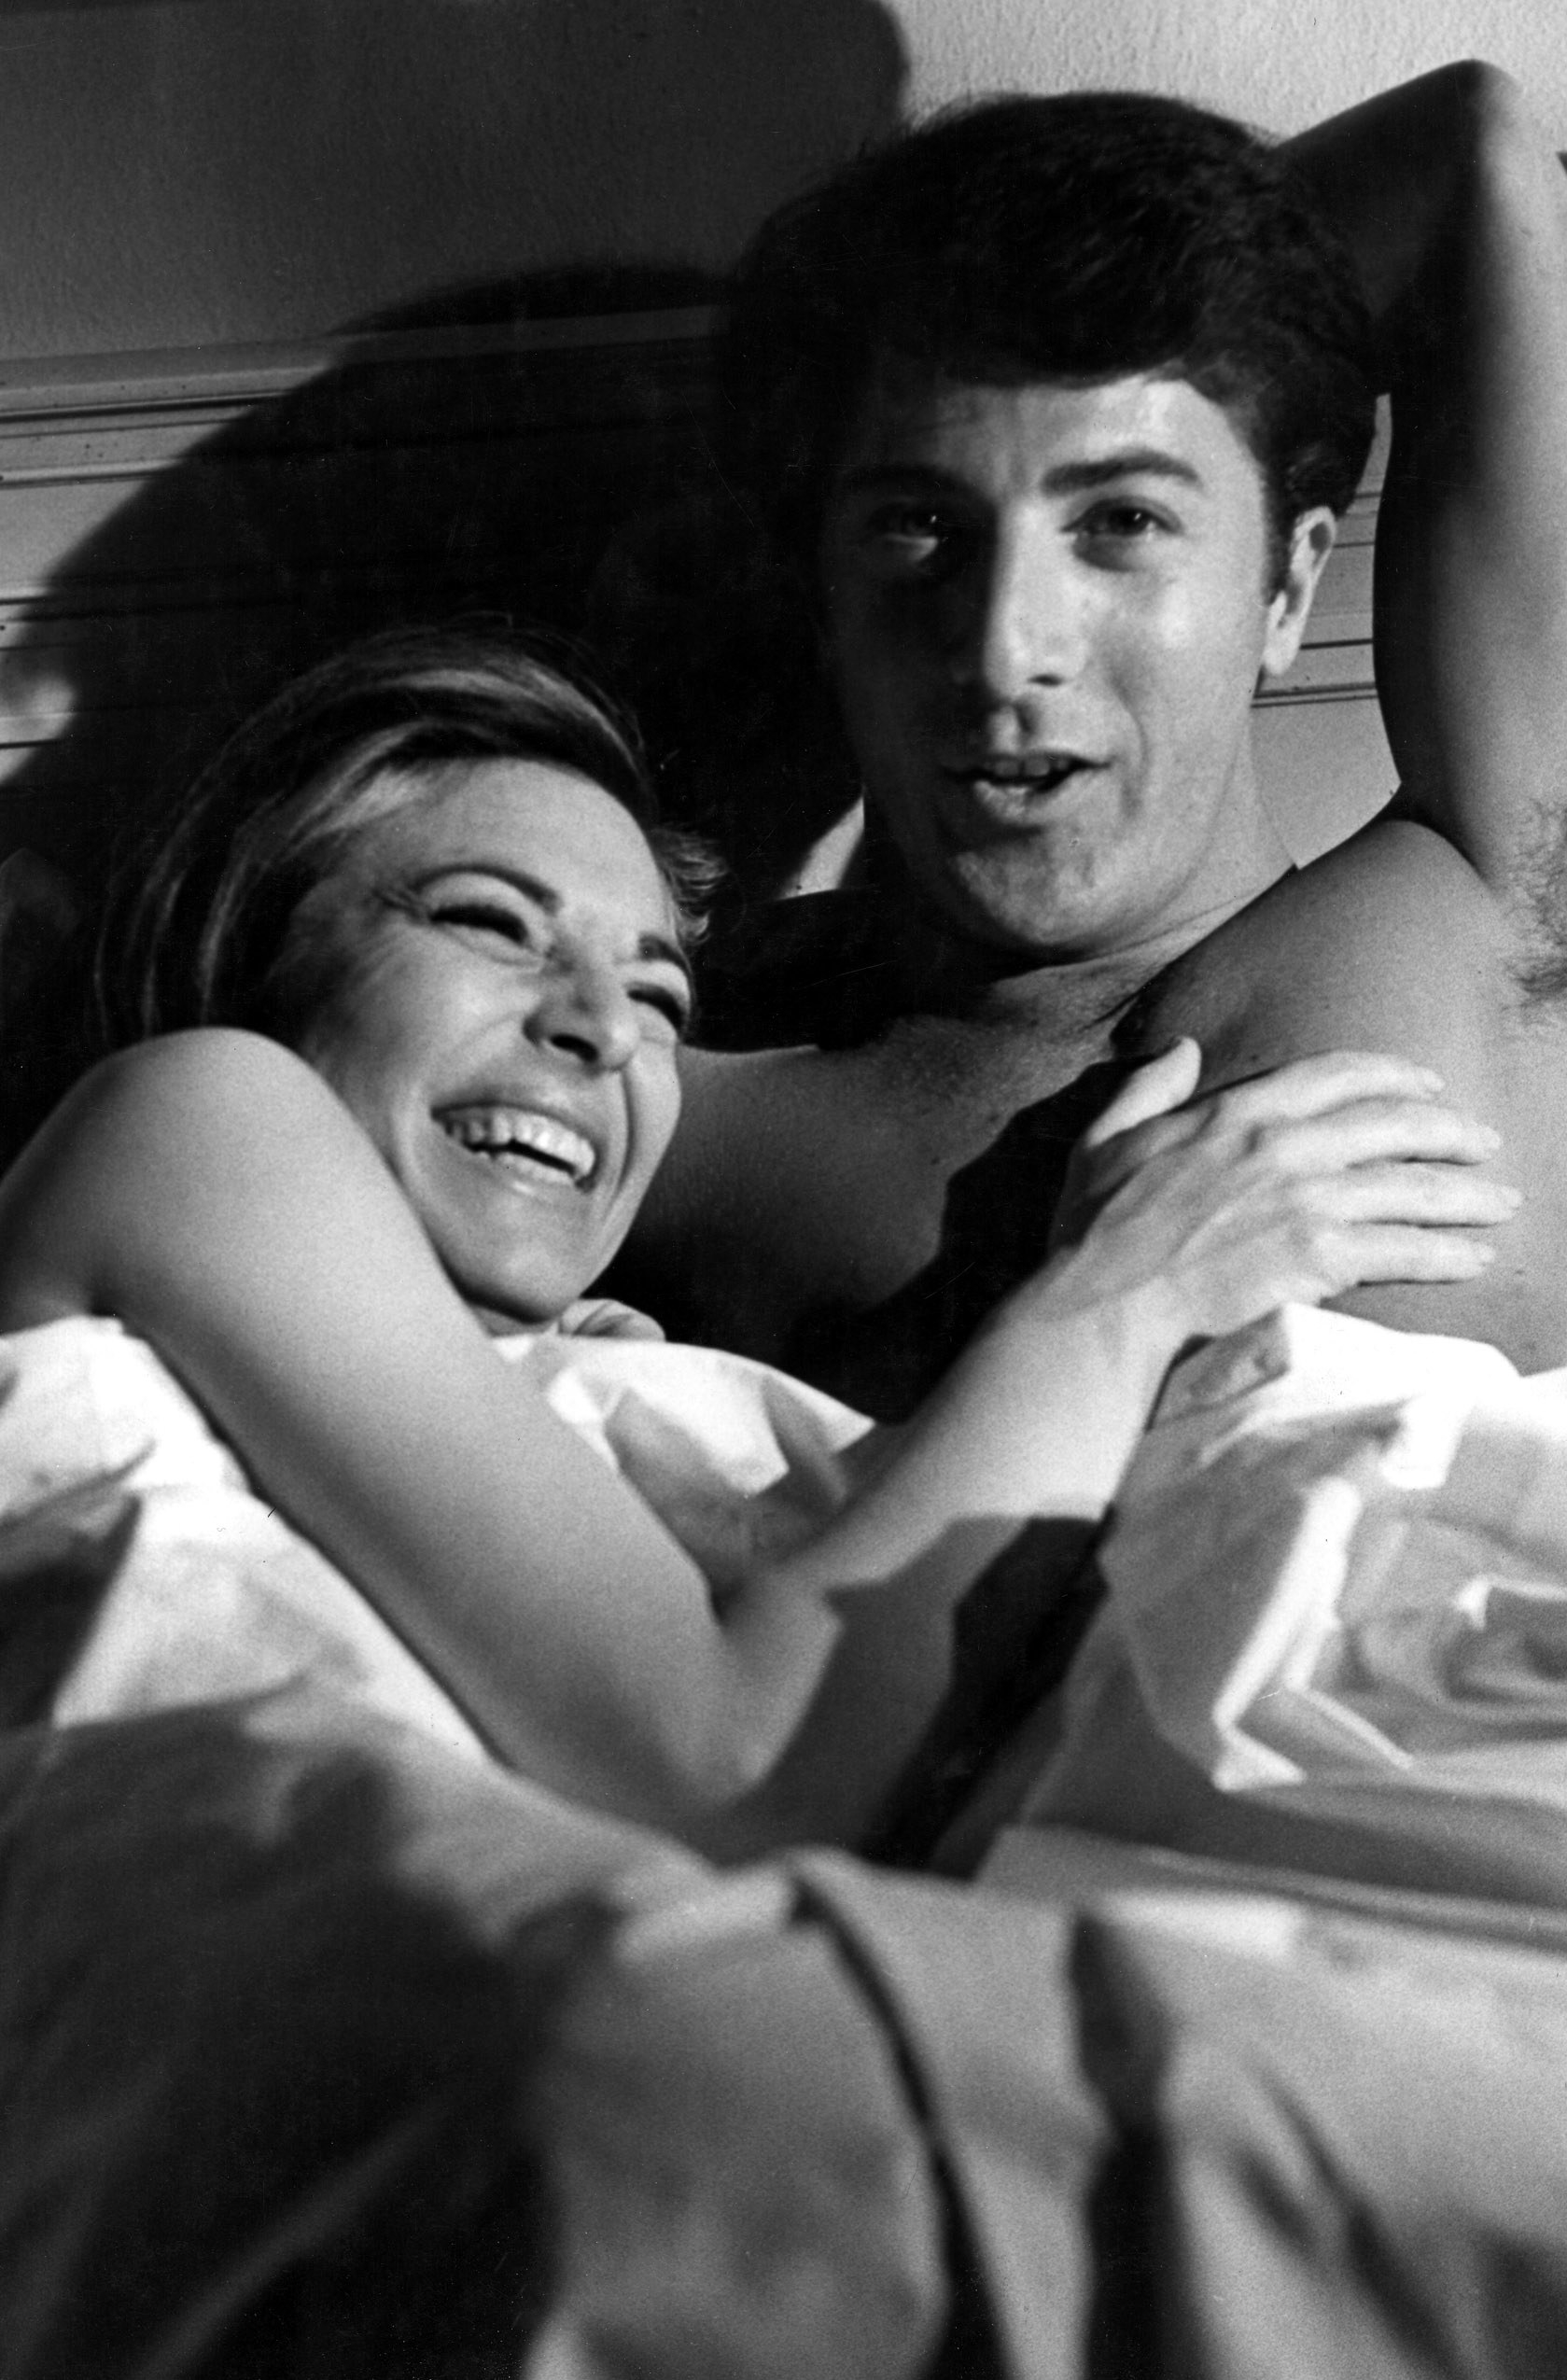 Bancroft and Hoffman laughing in bed